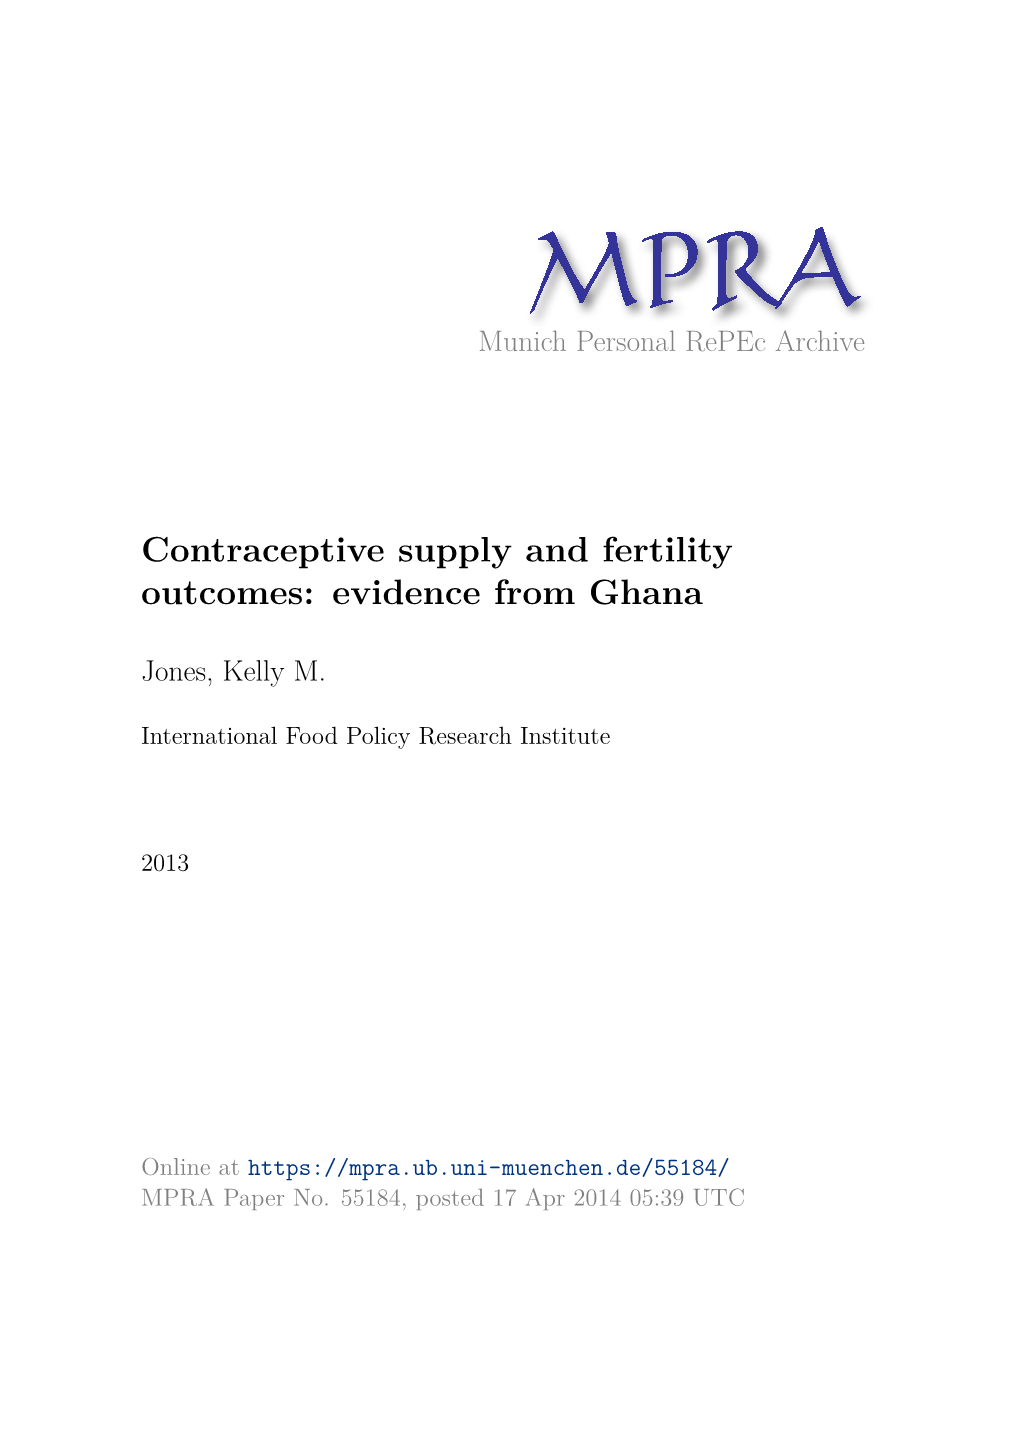 Contraceptive Supply and Fertility Outcomes: Evidence from Ghana